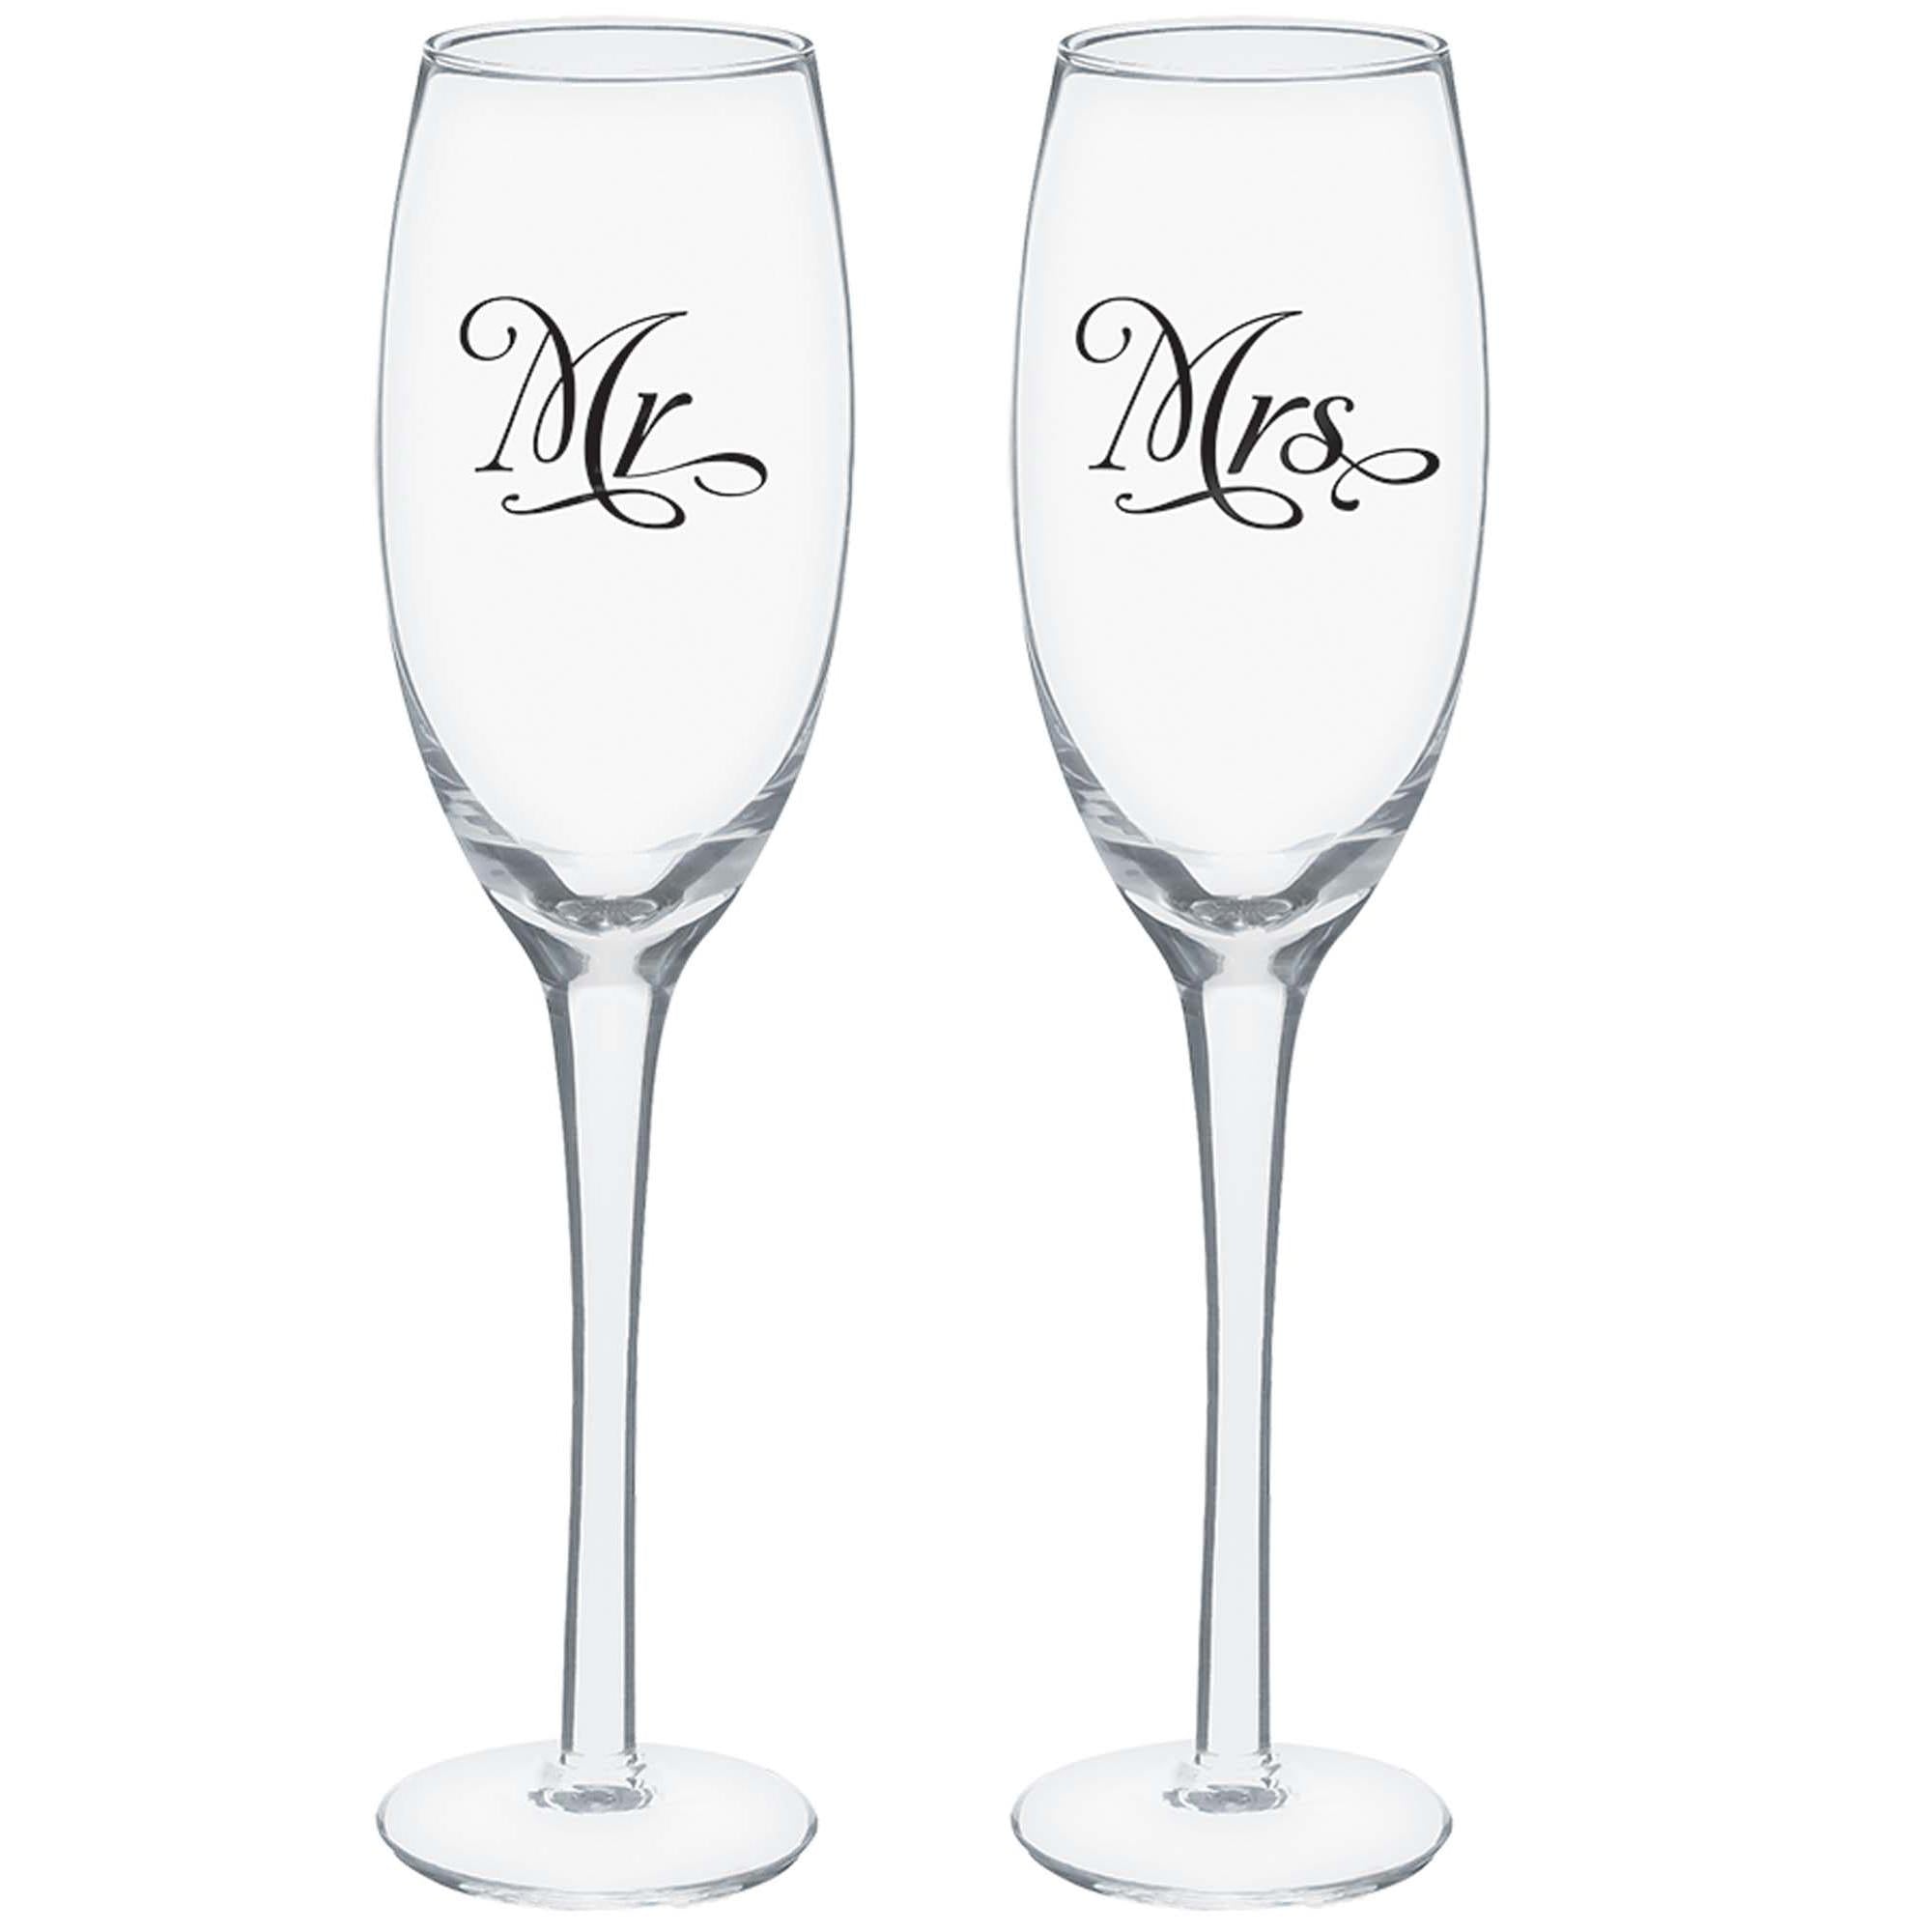 Mr. And Mrs. Toasting Glasses Candy Buffet - Party Centre